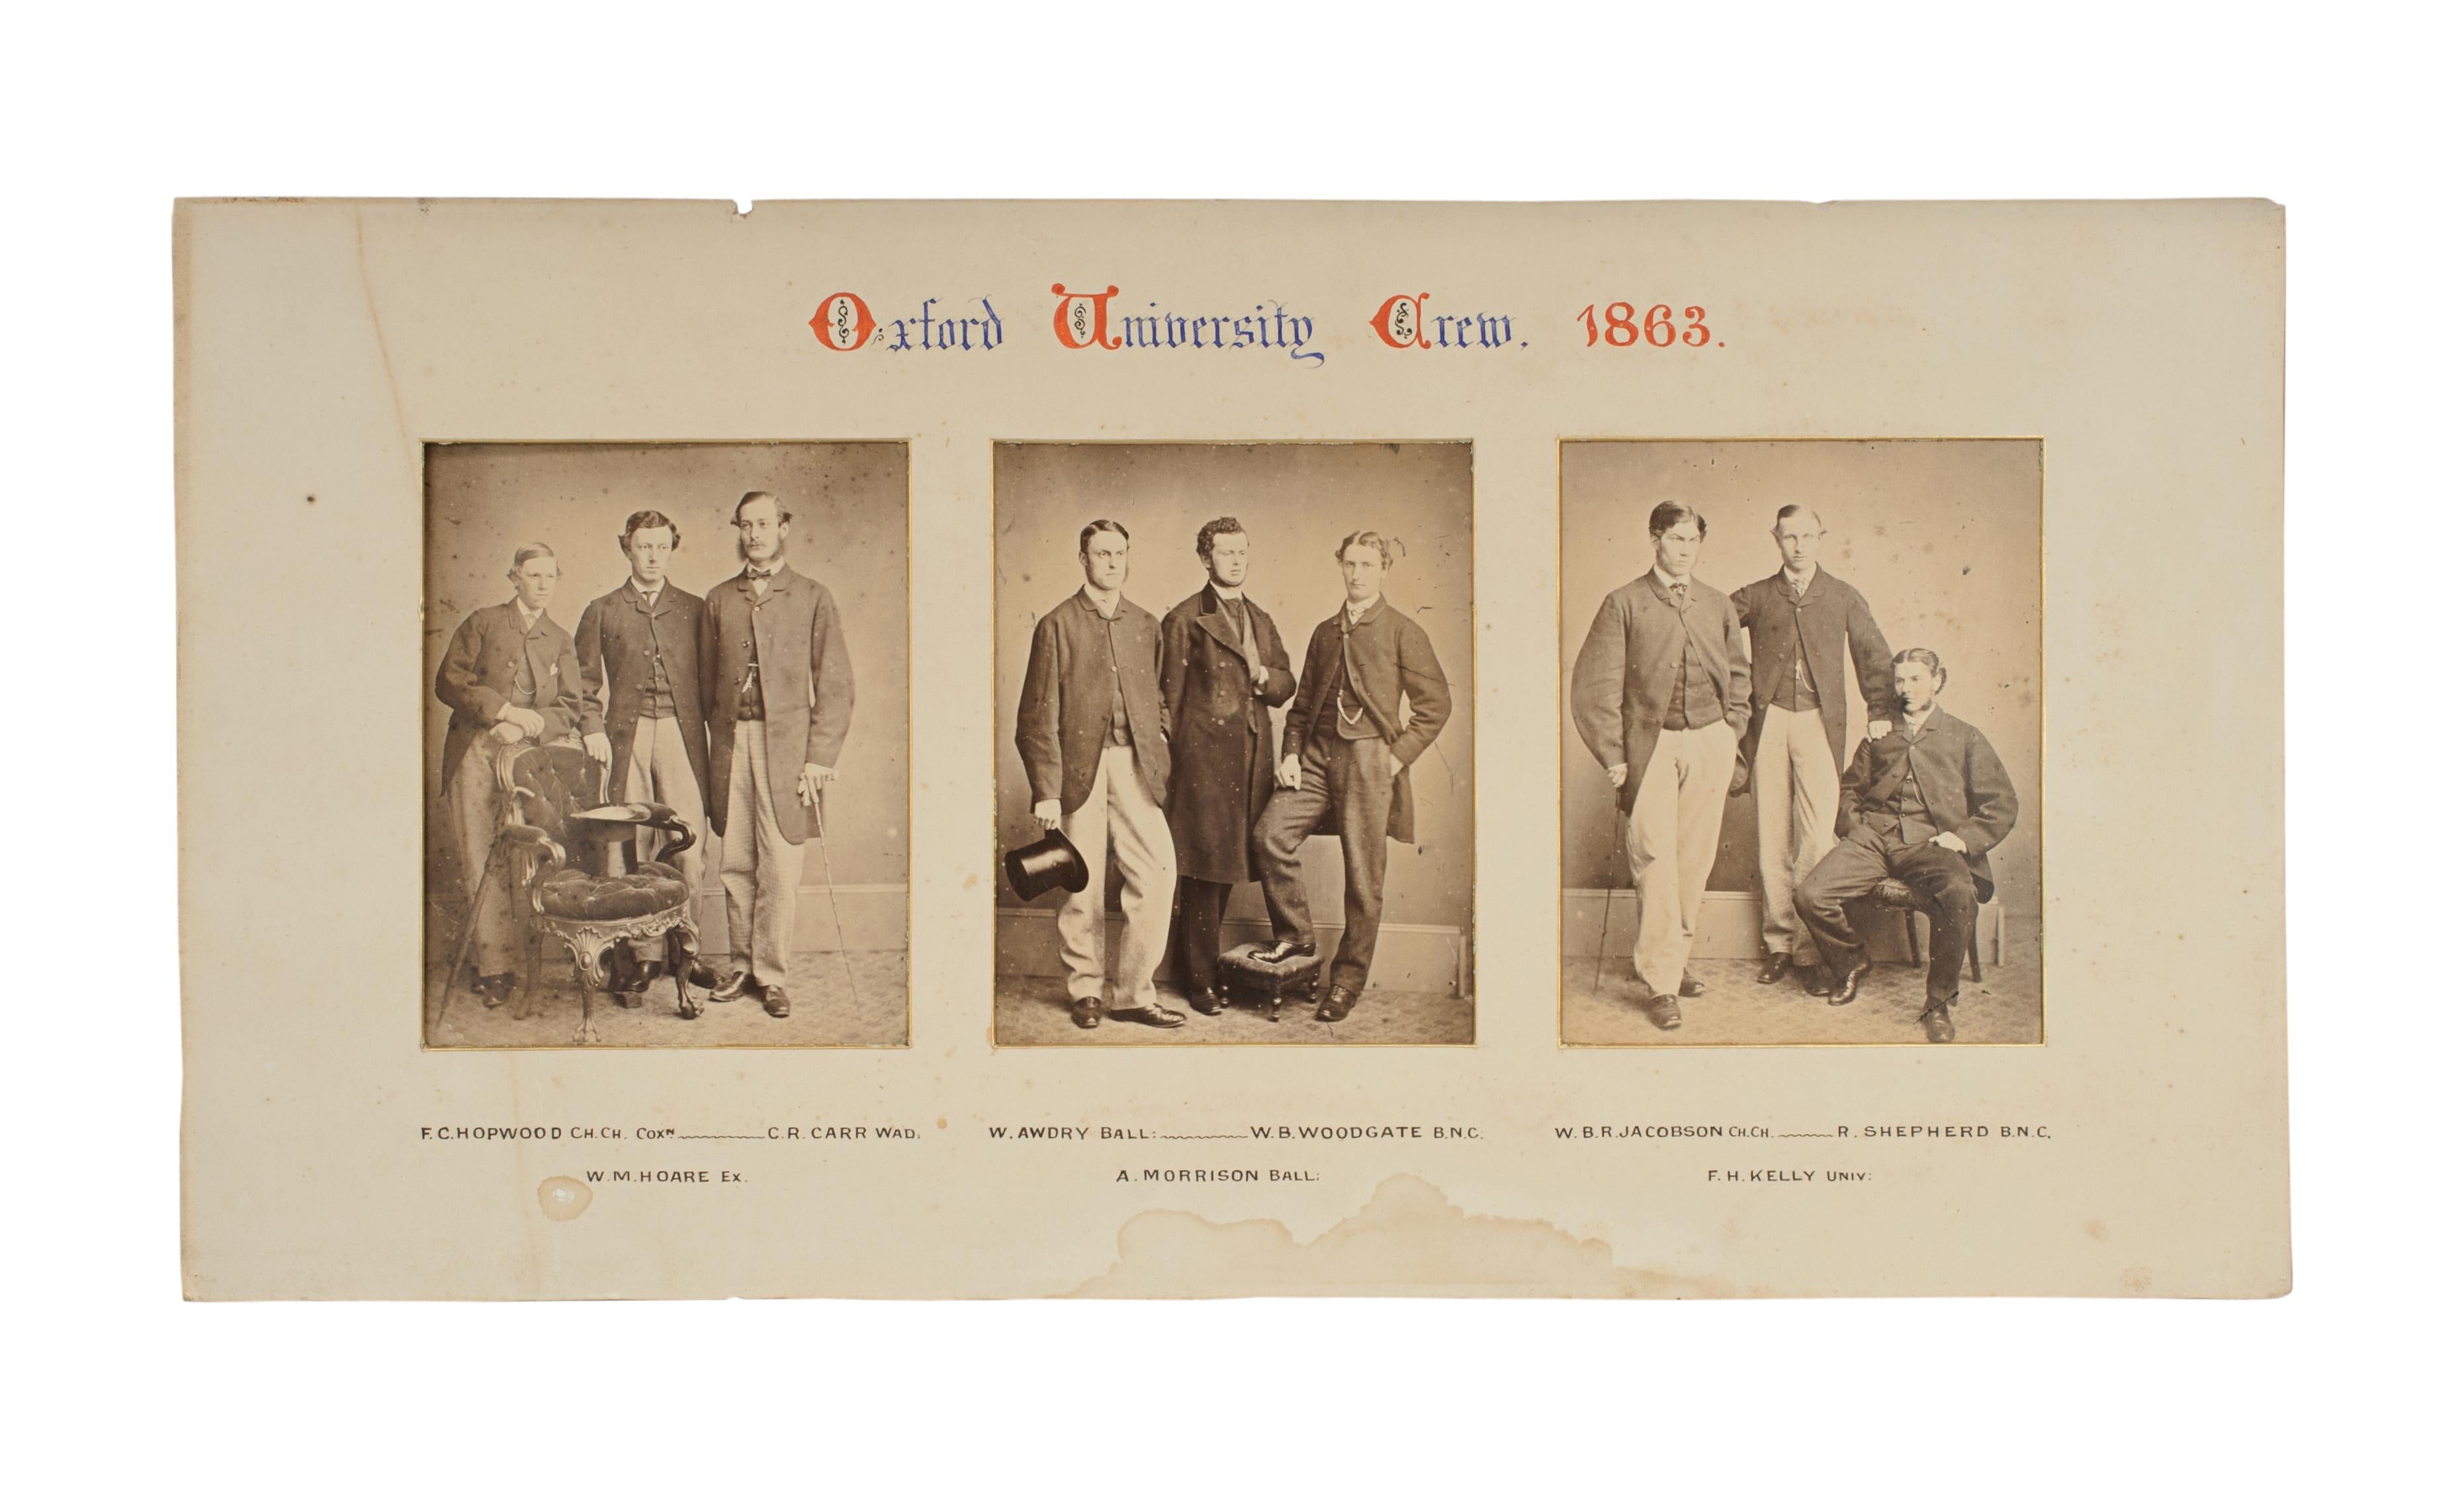 Oxford University boat race oar 1863.
This is the most wonderful memento of the 1863 Oxford and Cambridge University boat race. The traditional presentation trophy oar is the former property of the Oxford rower, No.5 Allan Morrison. The calligraphy